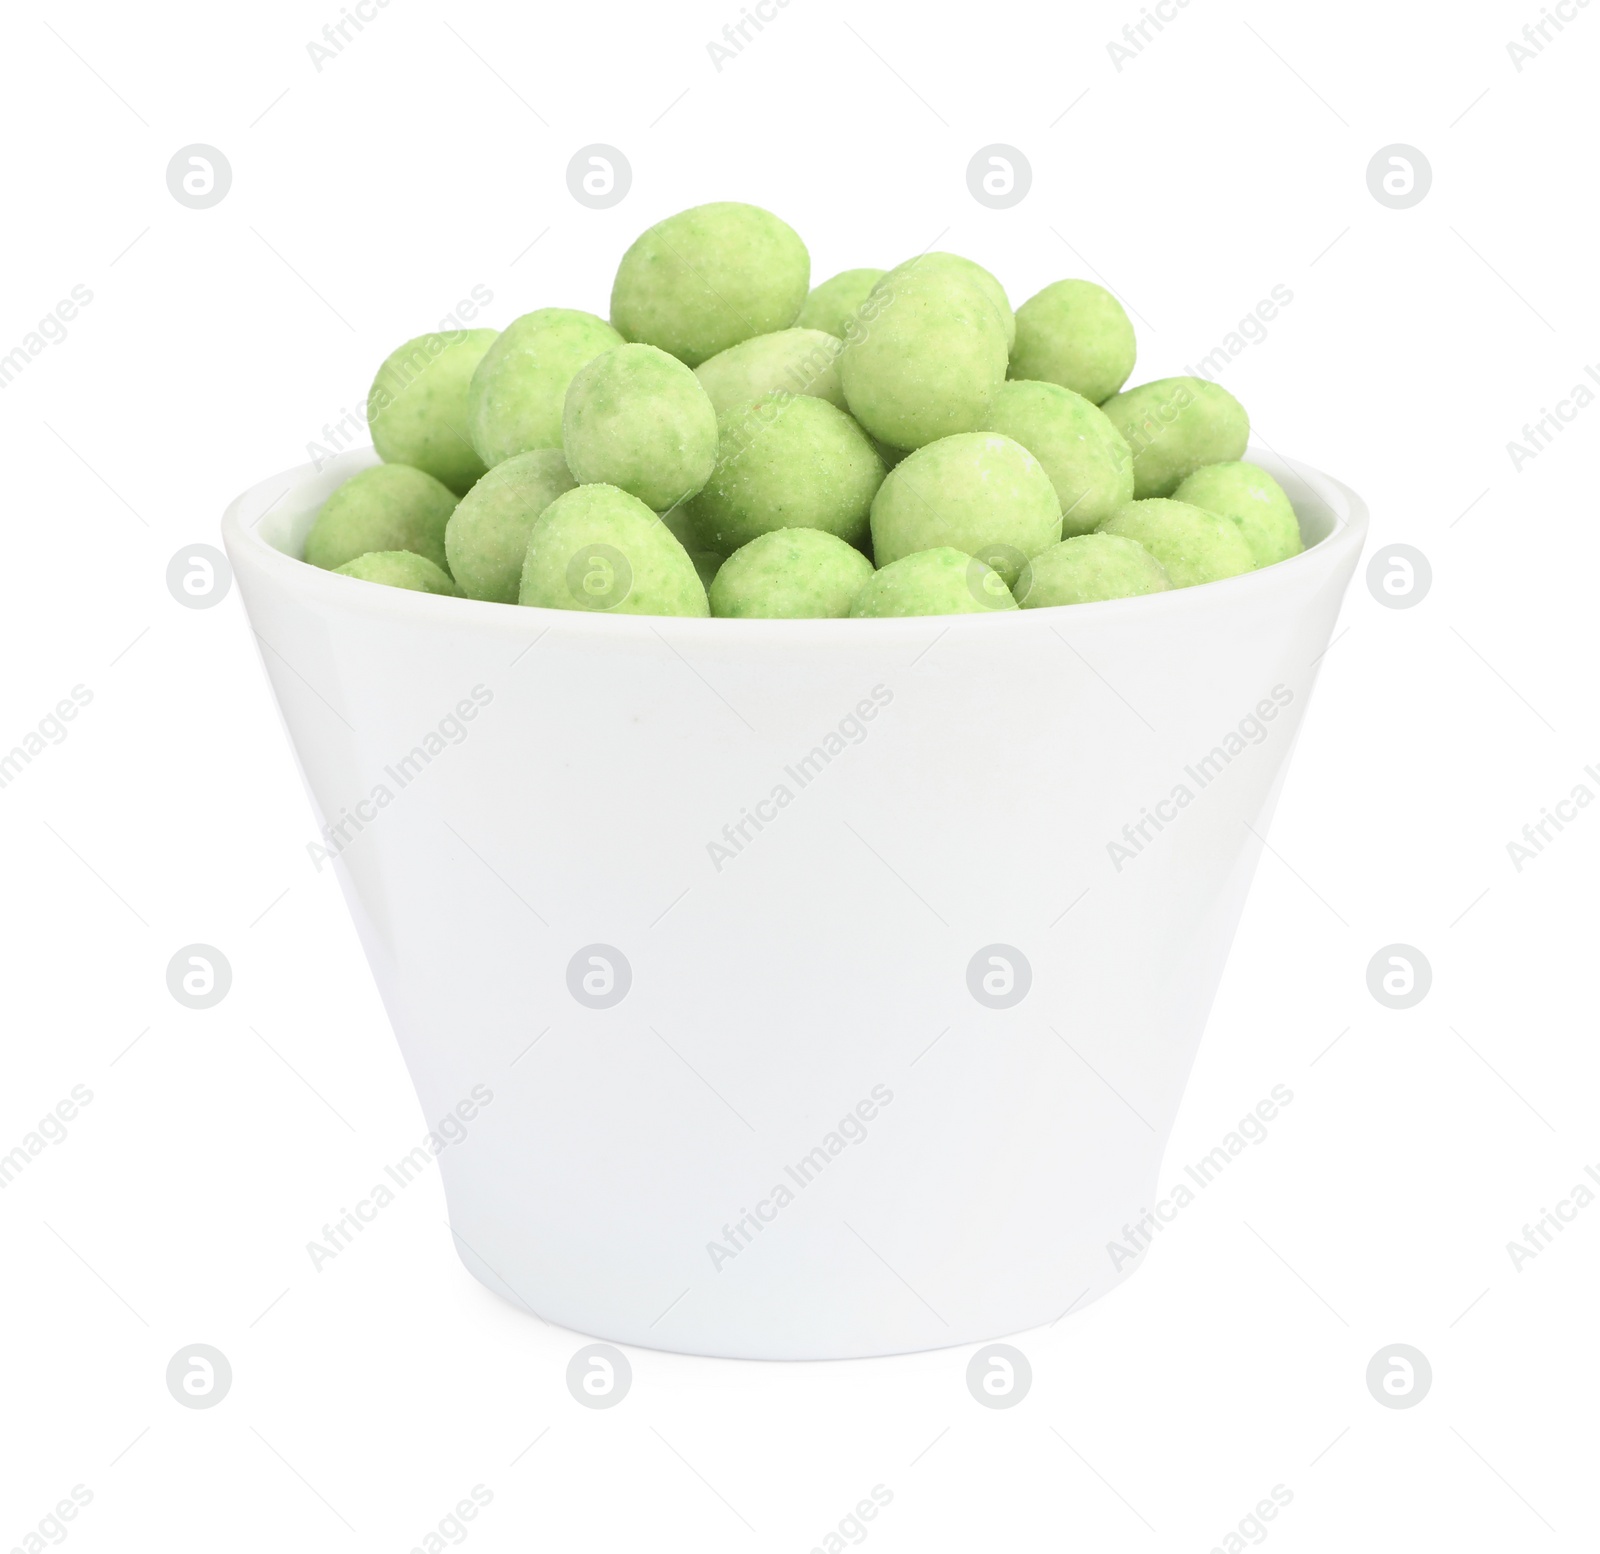 Photo of Tasty wasabi coated peanuts in bowl on white background